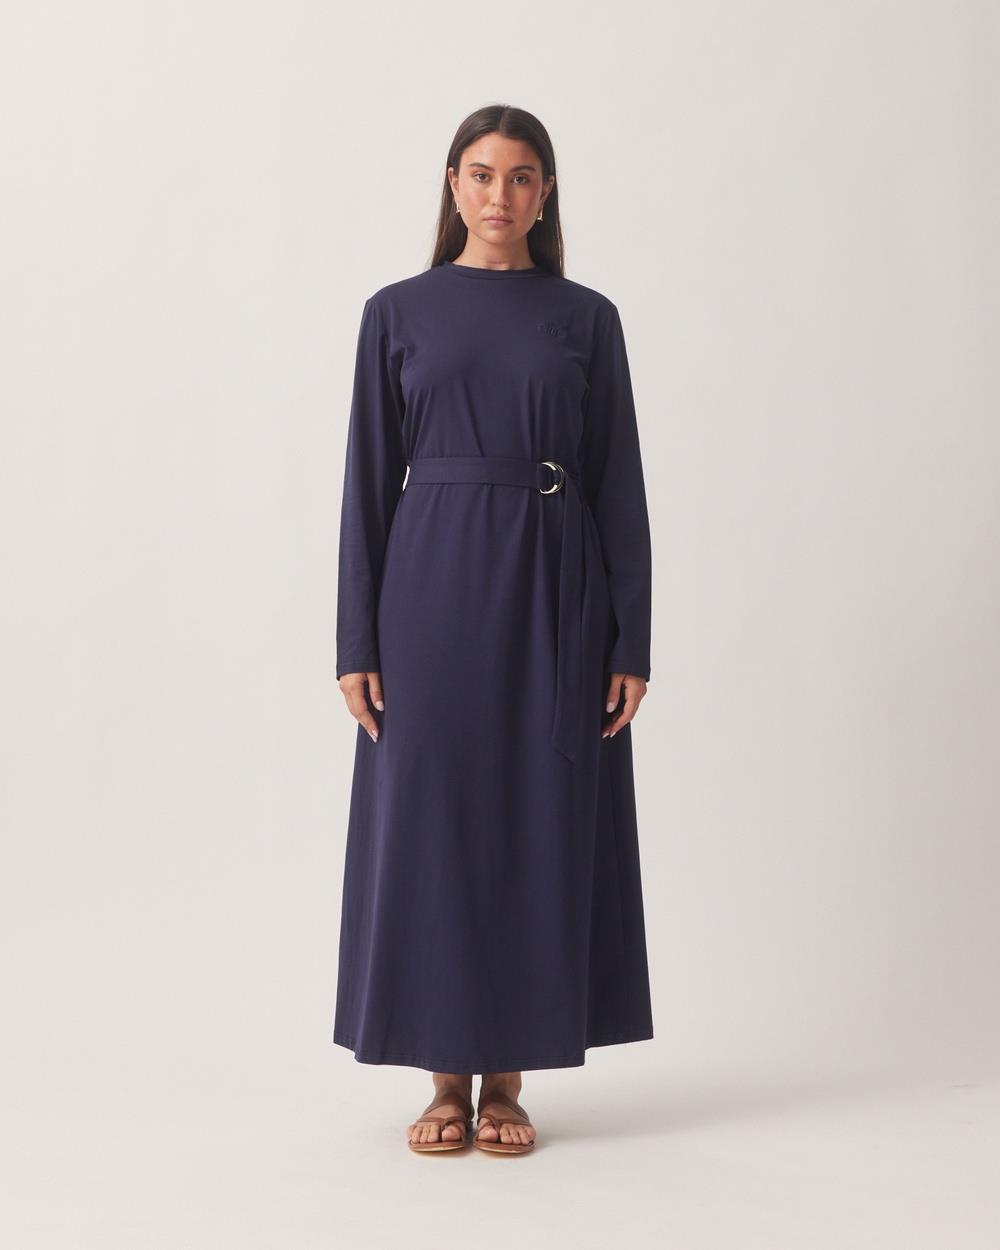 TWIICE - Day to Day Navy Cotton Jersey Maxi Dress - Dresses (Navy) Day to Day Navy Cotton Jersey Maxi Dress